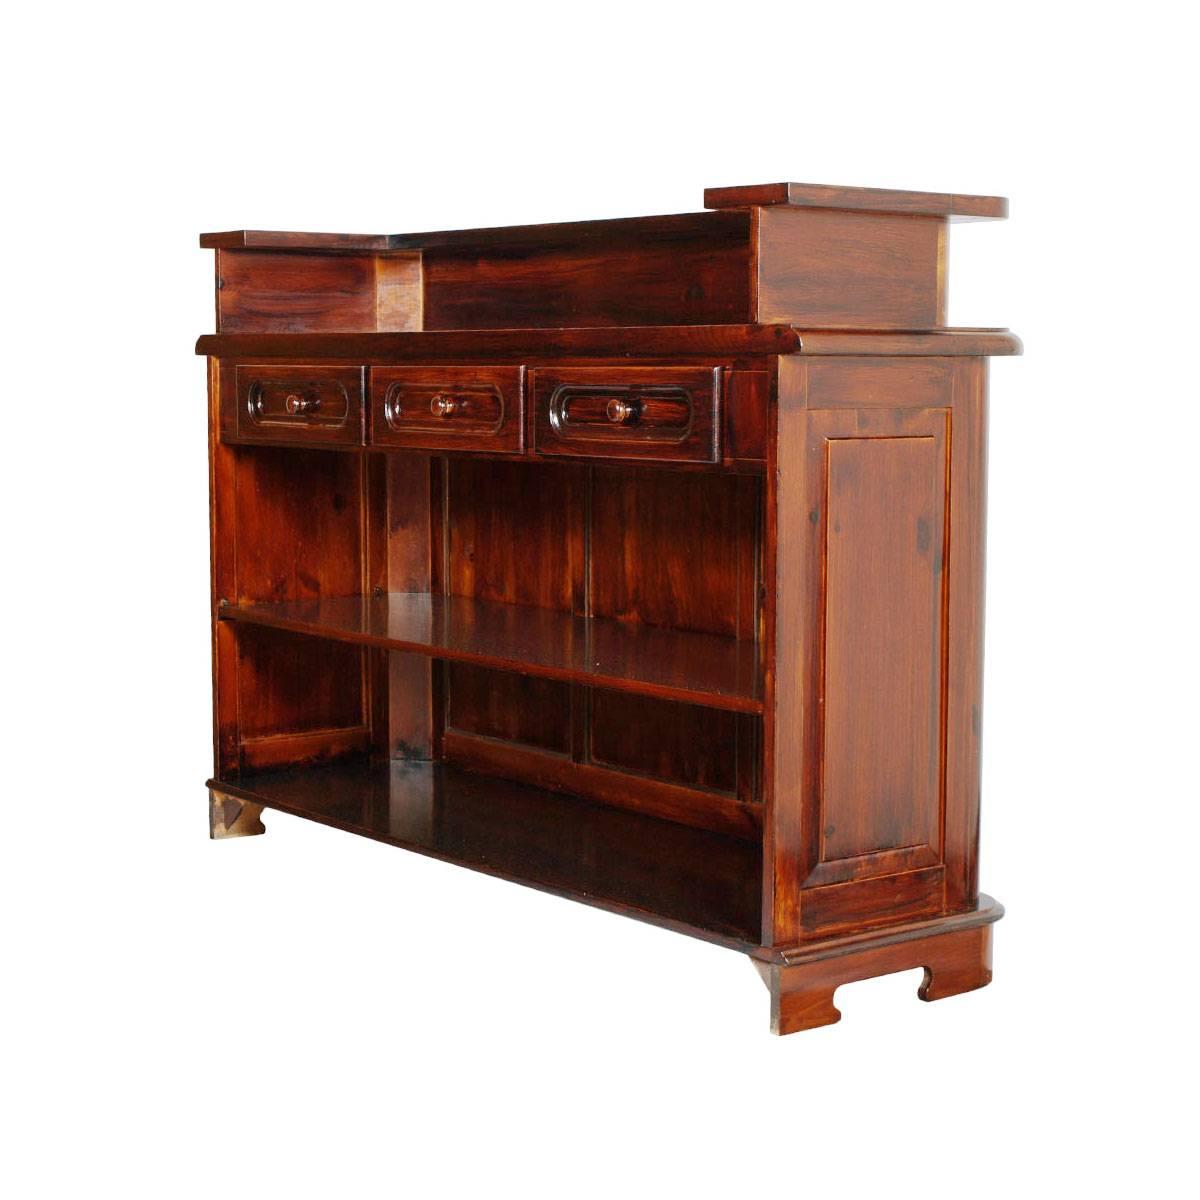 Early 20th Century counter tavern, also useful as a kitchen divider with three drawers, shelves in wax polished red larch. Excellent condition
Useful as a divider between kitchenette and dining tableExcellent conditions
Useful as a partition between